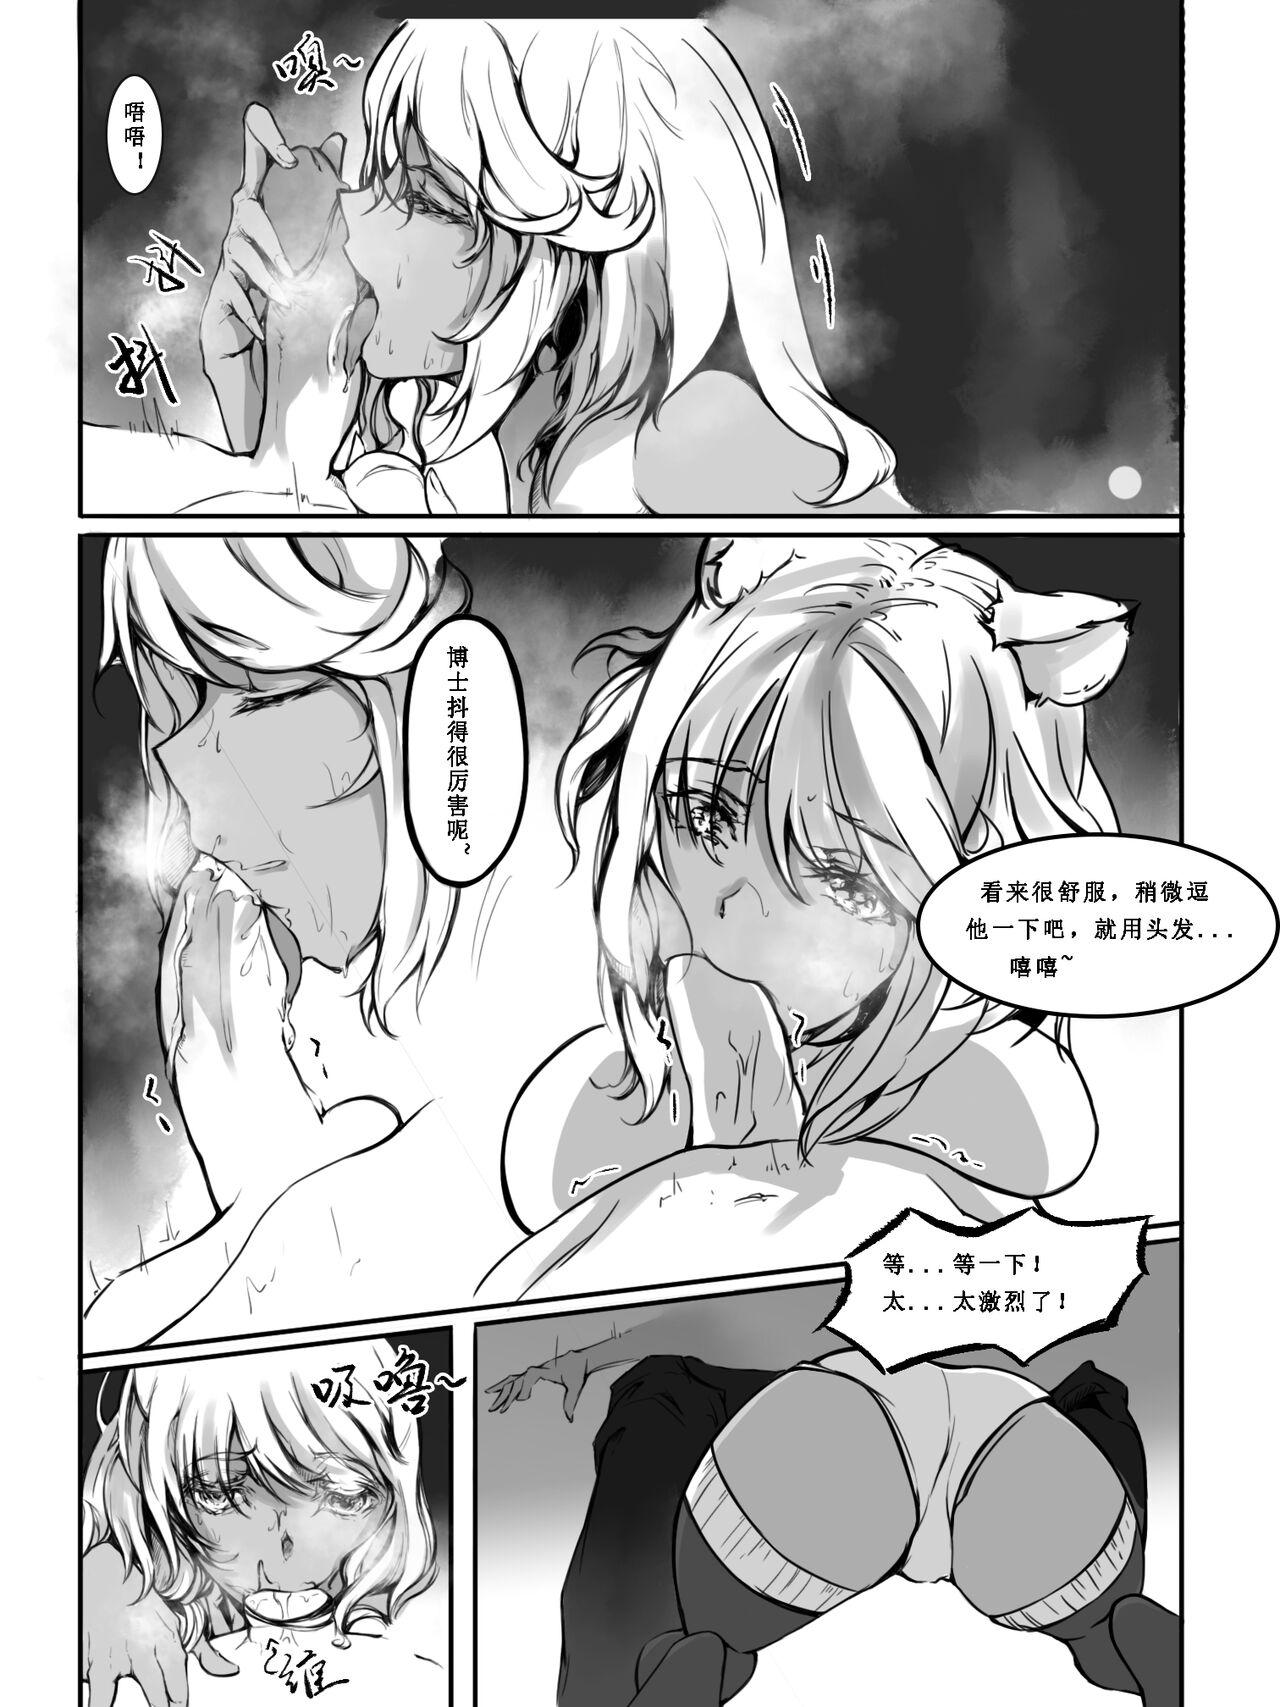 Granny Gravel R18 Doujinshi - Arknights Hot Wife - Page 7